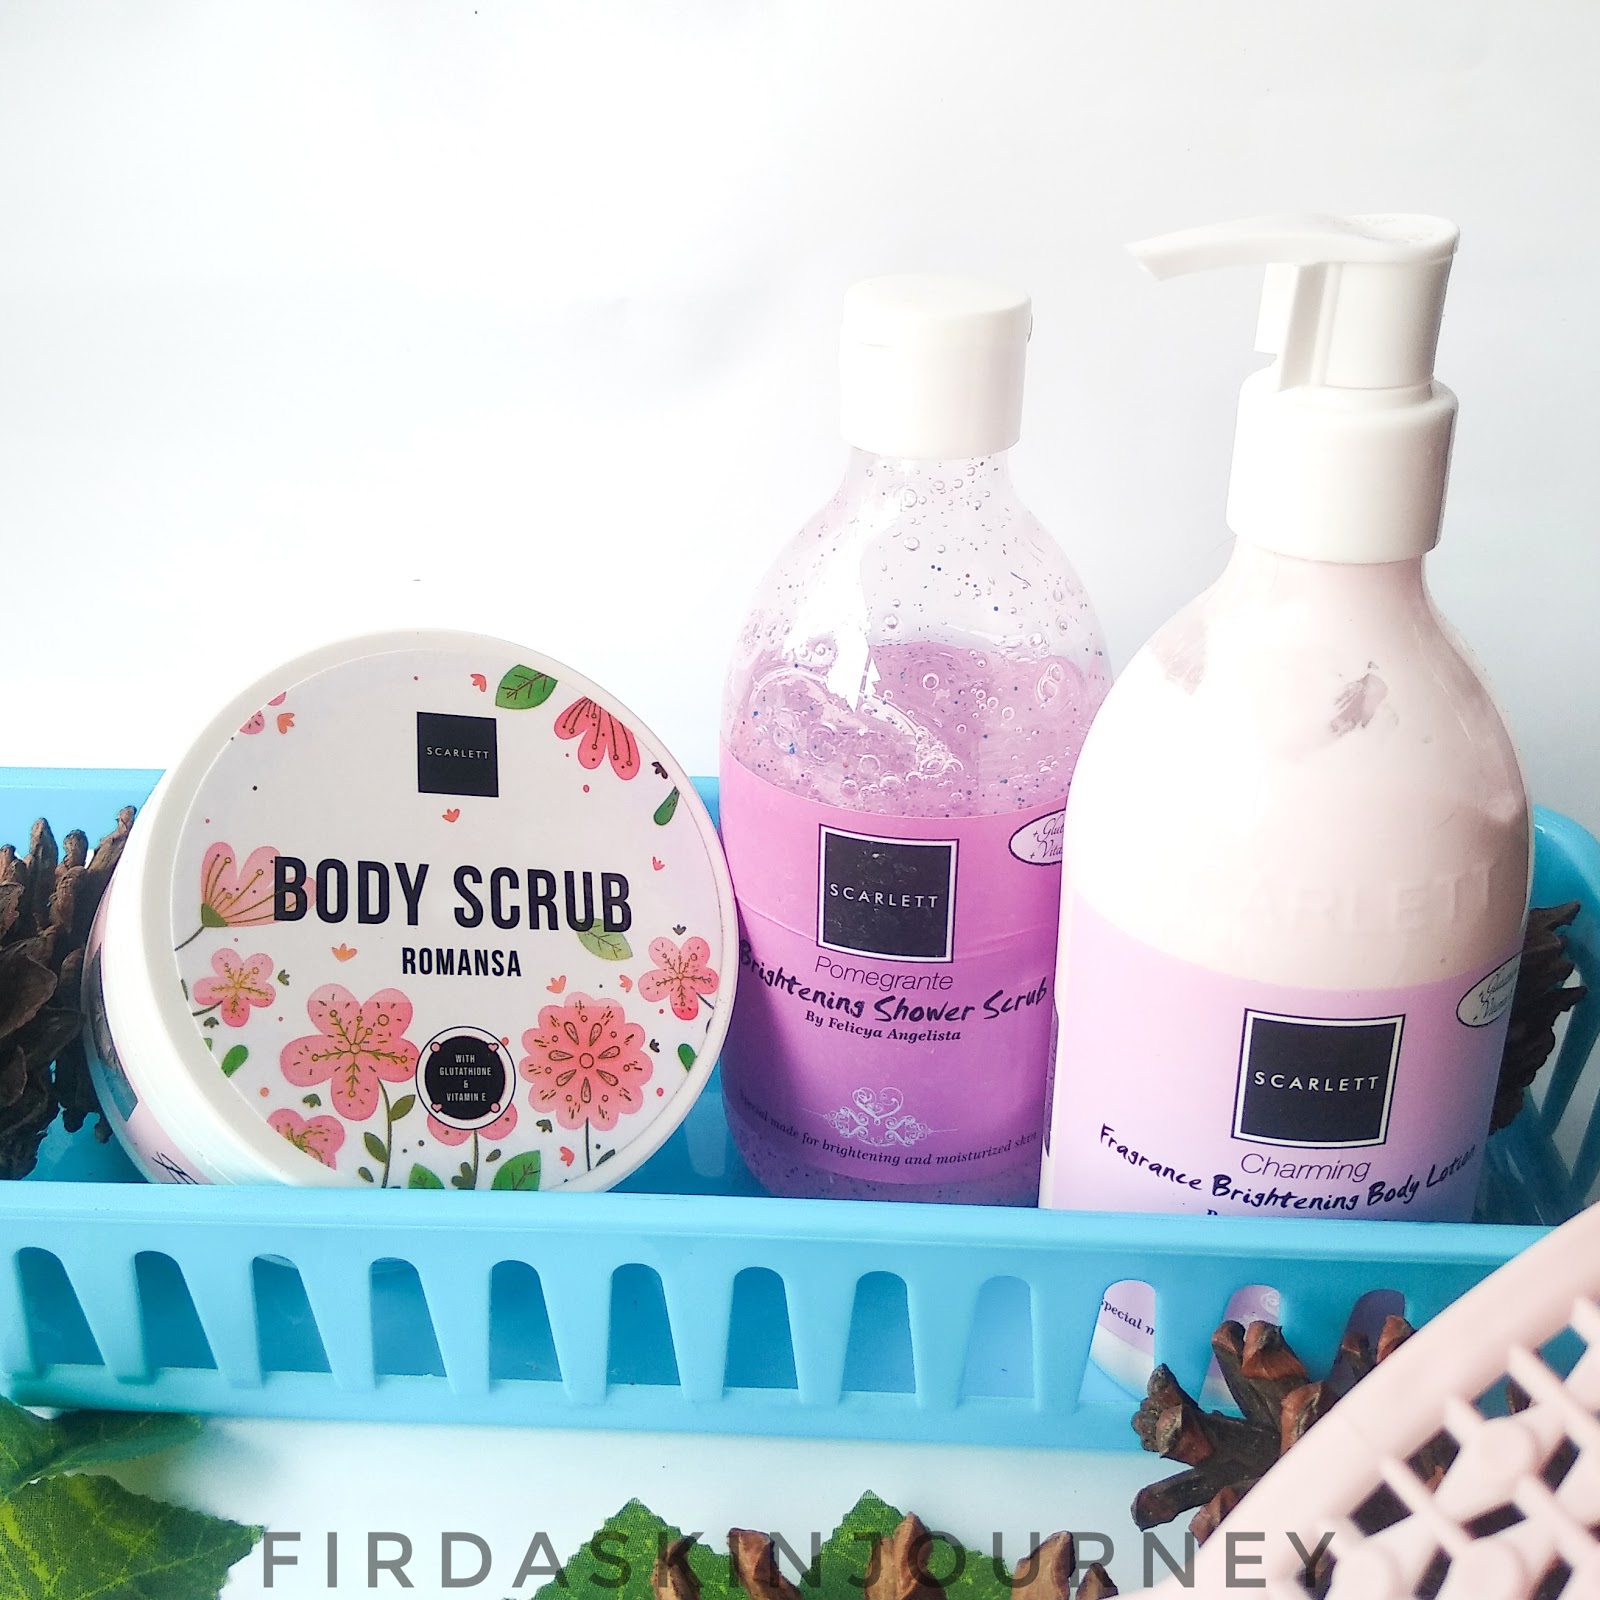 [REVIEW] MY BODY CARE ROUTINE WITH SCARLETT WHITENING